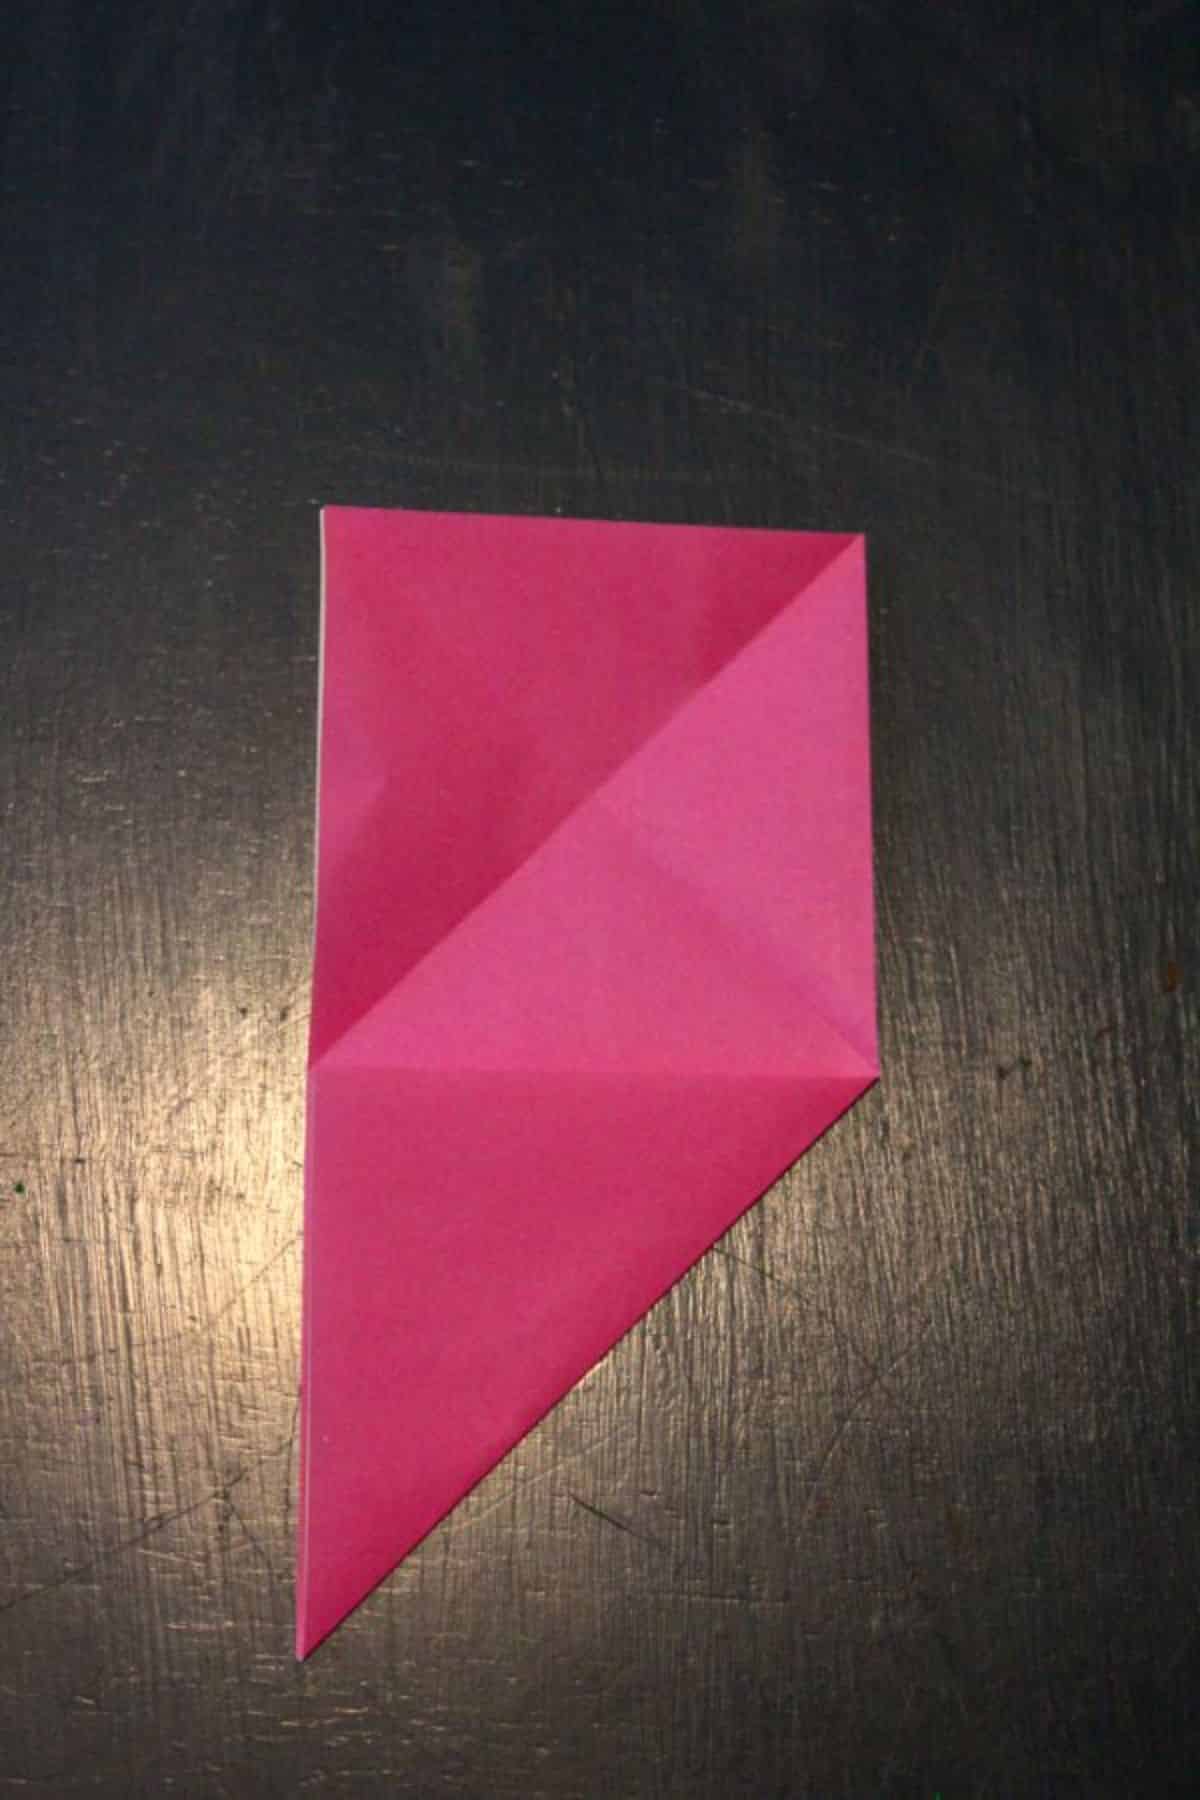 pink origami paper folded into diagonal on lower right corner on a black background.